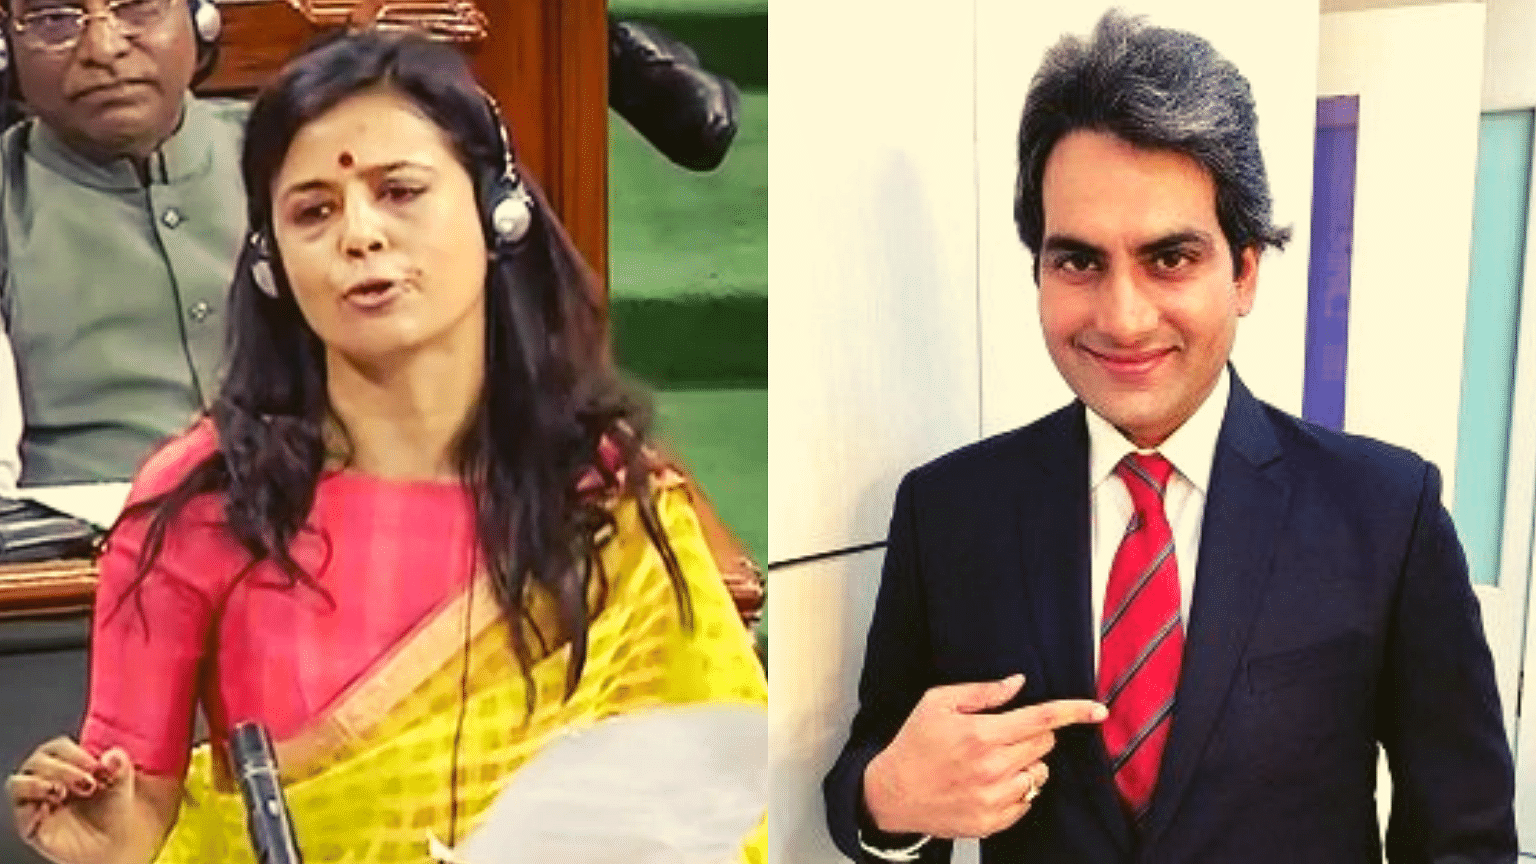 TMC MP Mahua Moitra has filed a criminal defamation case against Sudhir Chaudhary for alleging that her speech on the ‘Seven Signs of Fascism’ on 25 June was plagiarised.